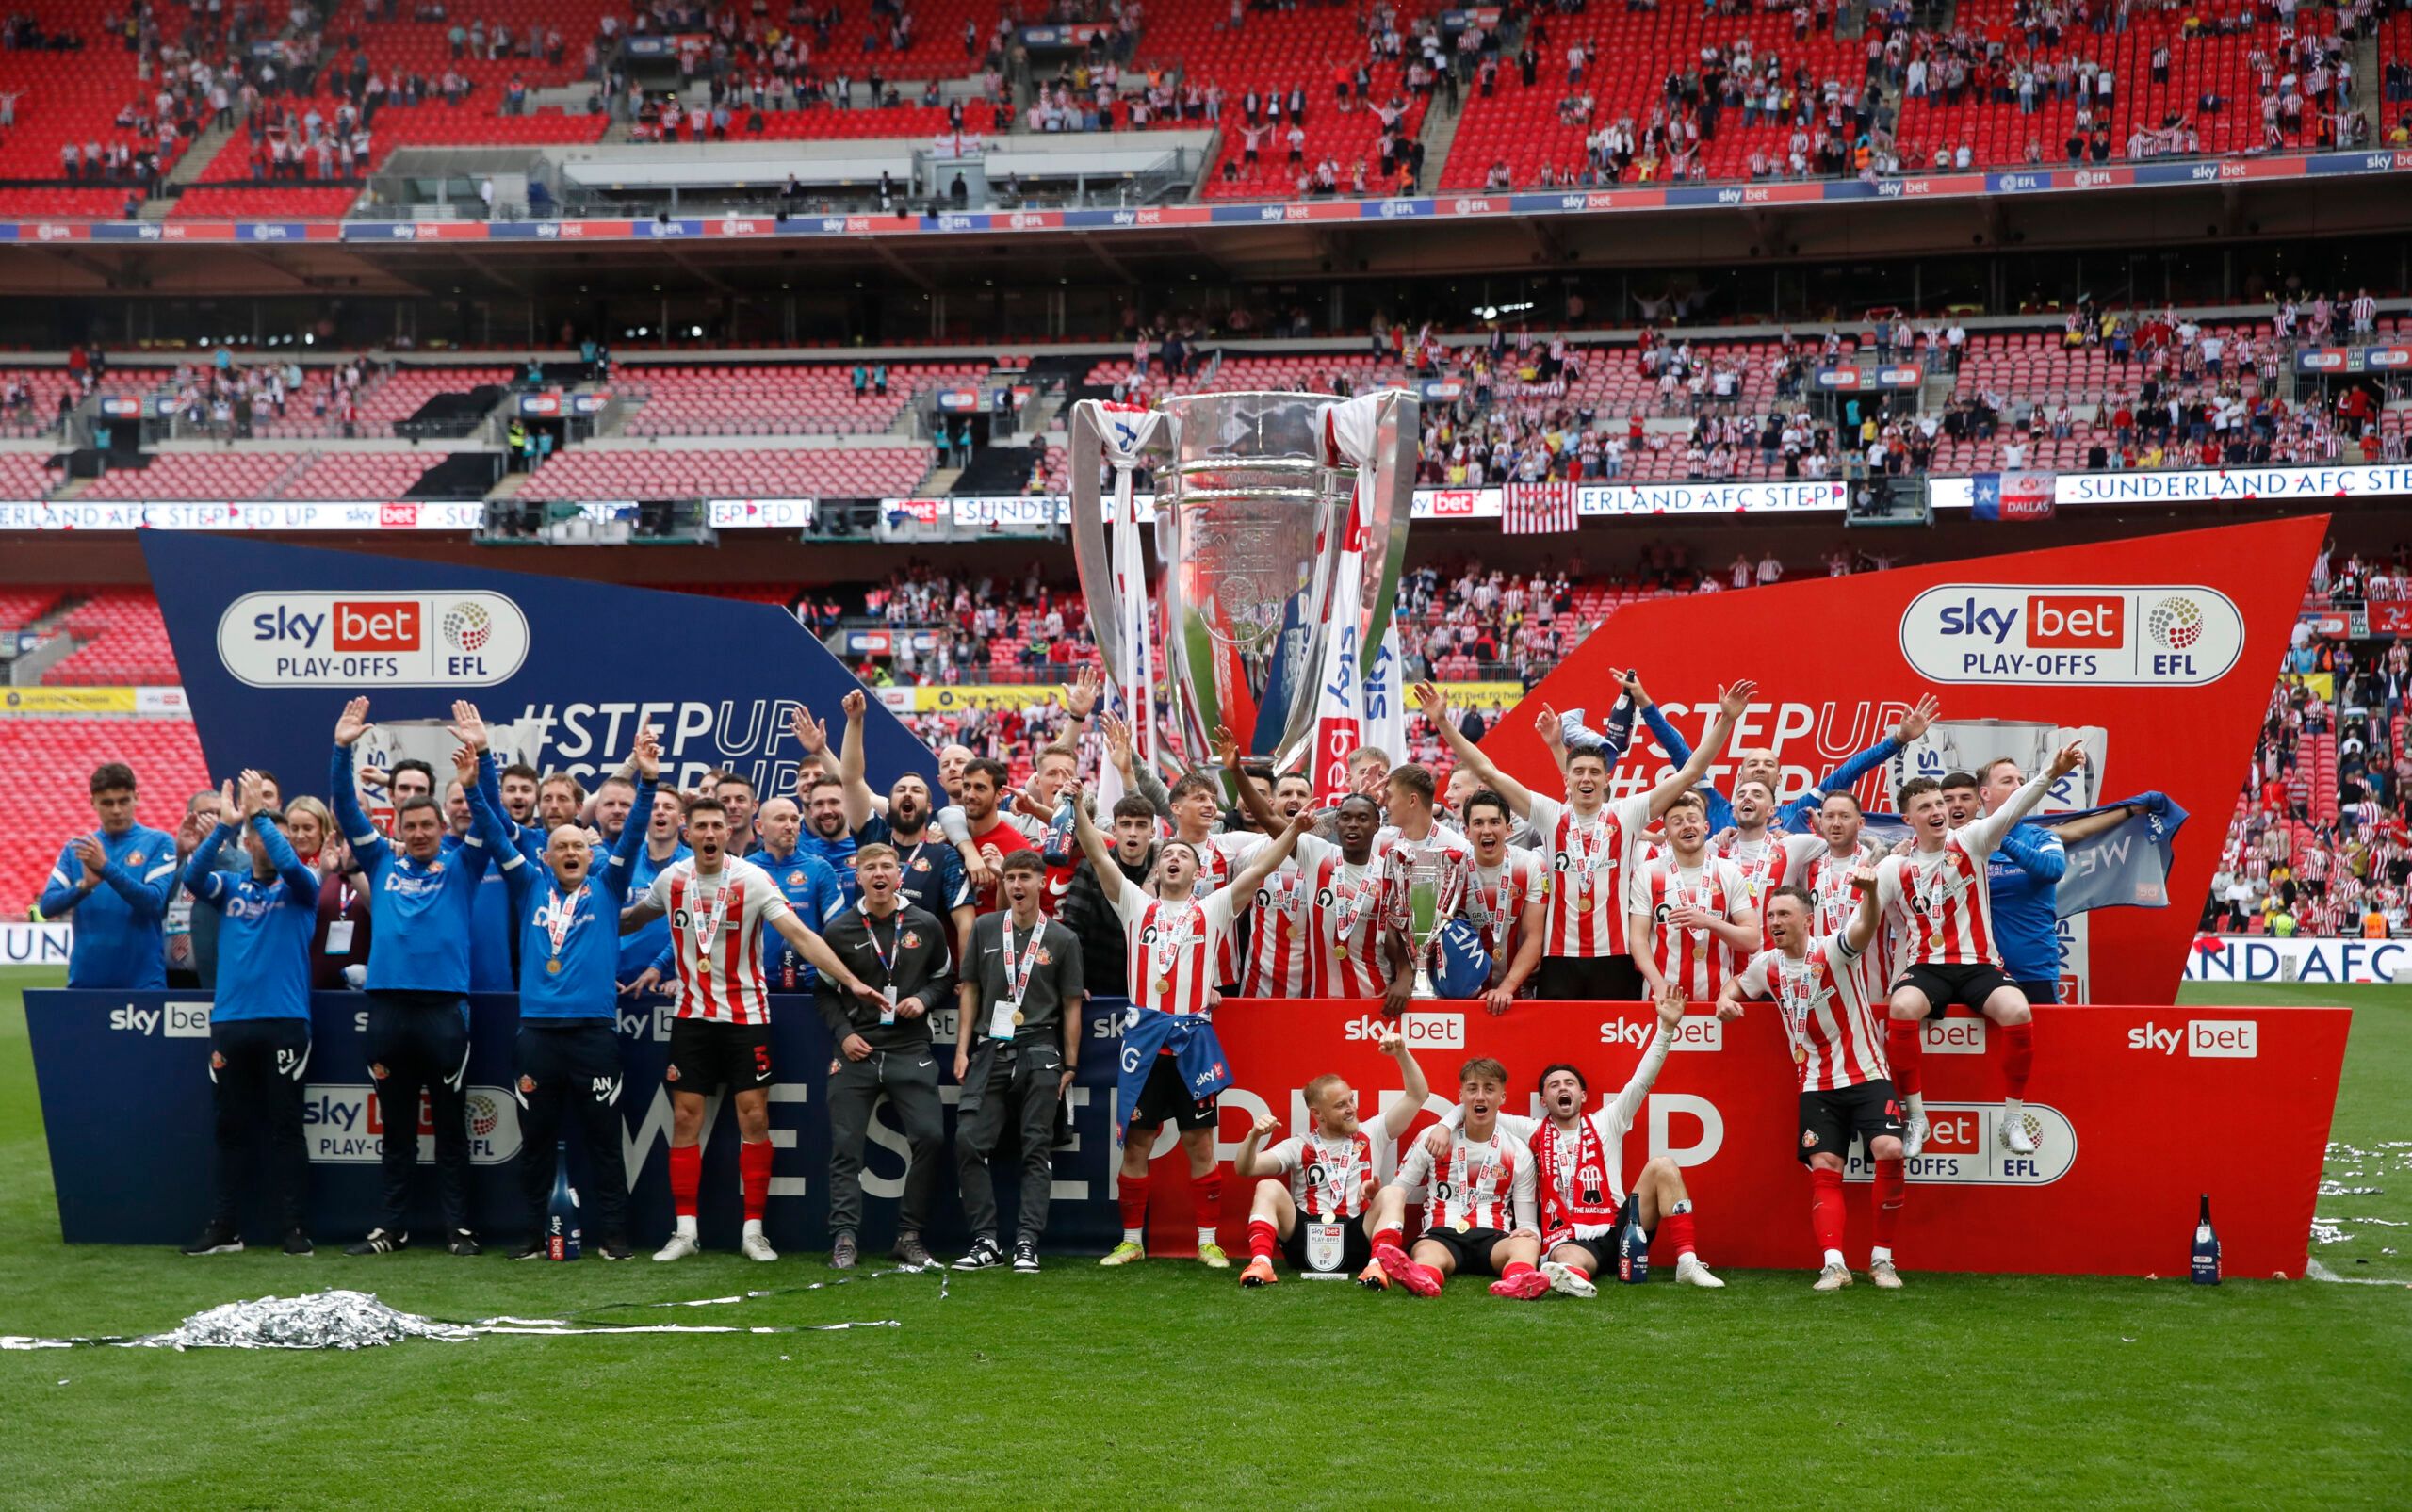 Soccer Football - League One Play-Off Final - Sunderland v Wycombe Wanderers - Wembley Stadium, London, Britain - May 21, 2022  Sunderland players and coaches celebrate with the trophy after winning the League One Play-Off Action Images/Matthew Childs EDITORIAL USE ONLY. No use with unauthorized audio, video, data, fixture lists, club/league logos or 'live' services. Online in-match use limited to 75 images, no video emulation. No use in betting, games or single club /league/player publications.